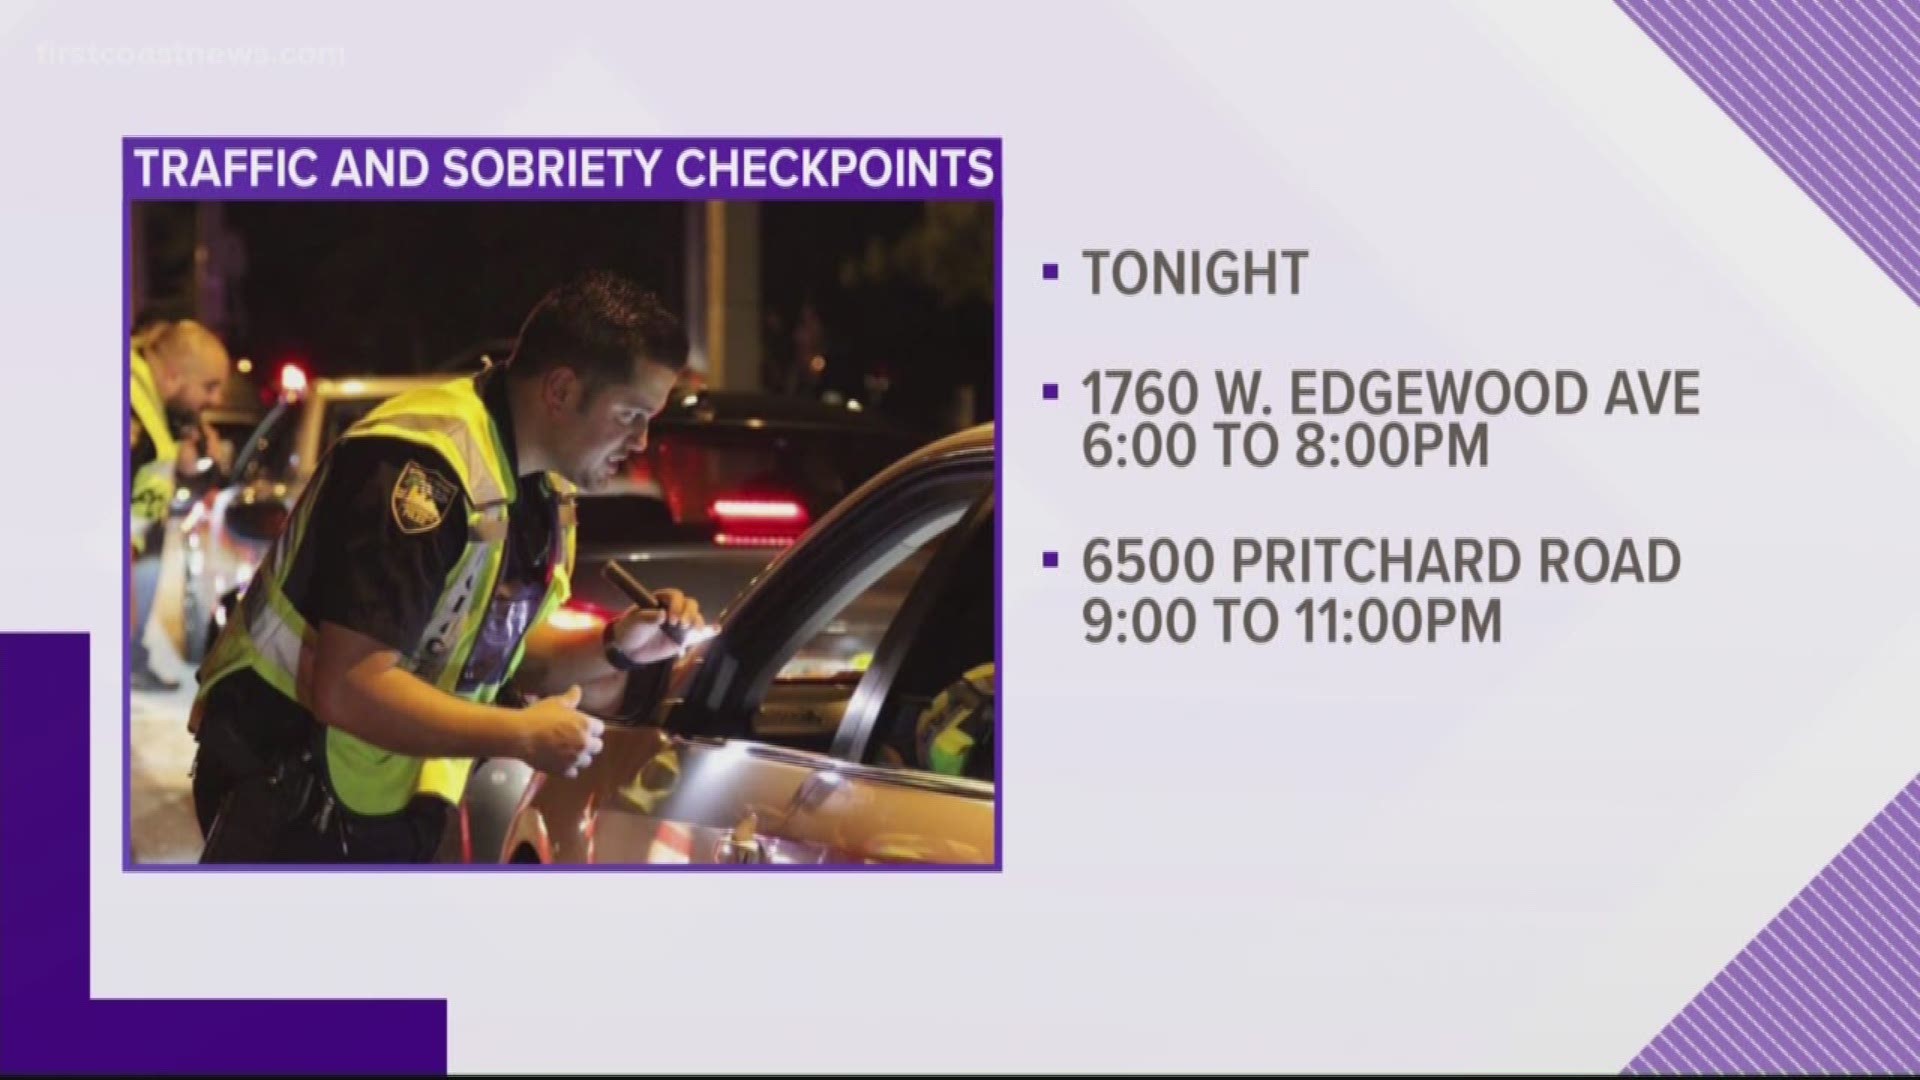 The first checkpoint will be at 1760 W. Edgewood Ave. from 6 p.m. to 8 p.m. The second checkpoint will be at 6500 Pritchard Road from 9 p.m. to 11 p.m.